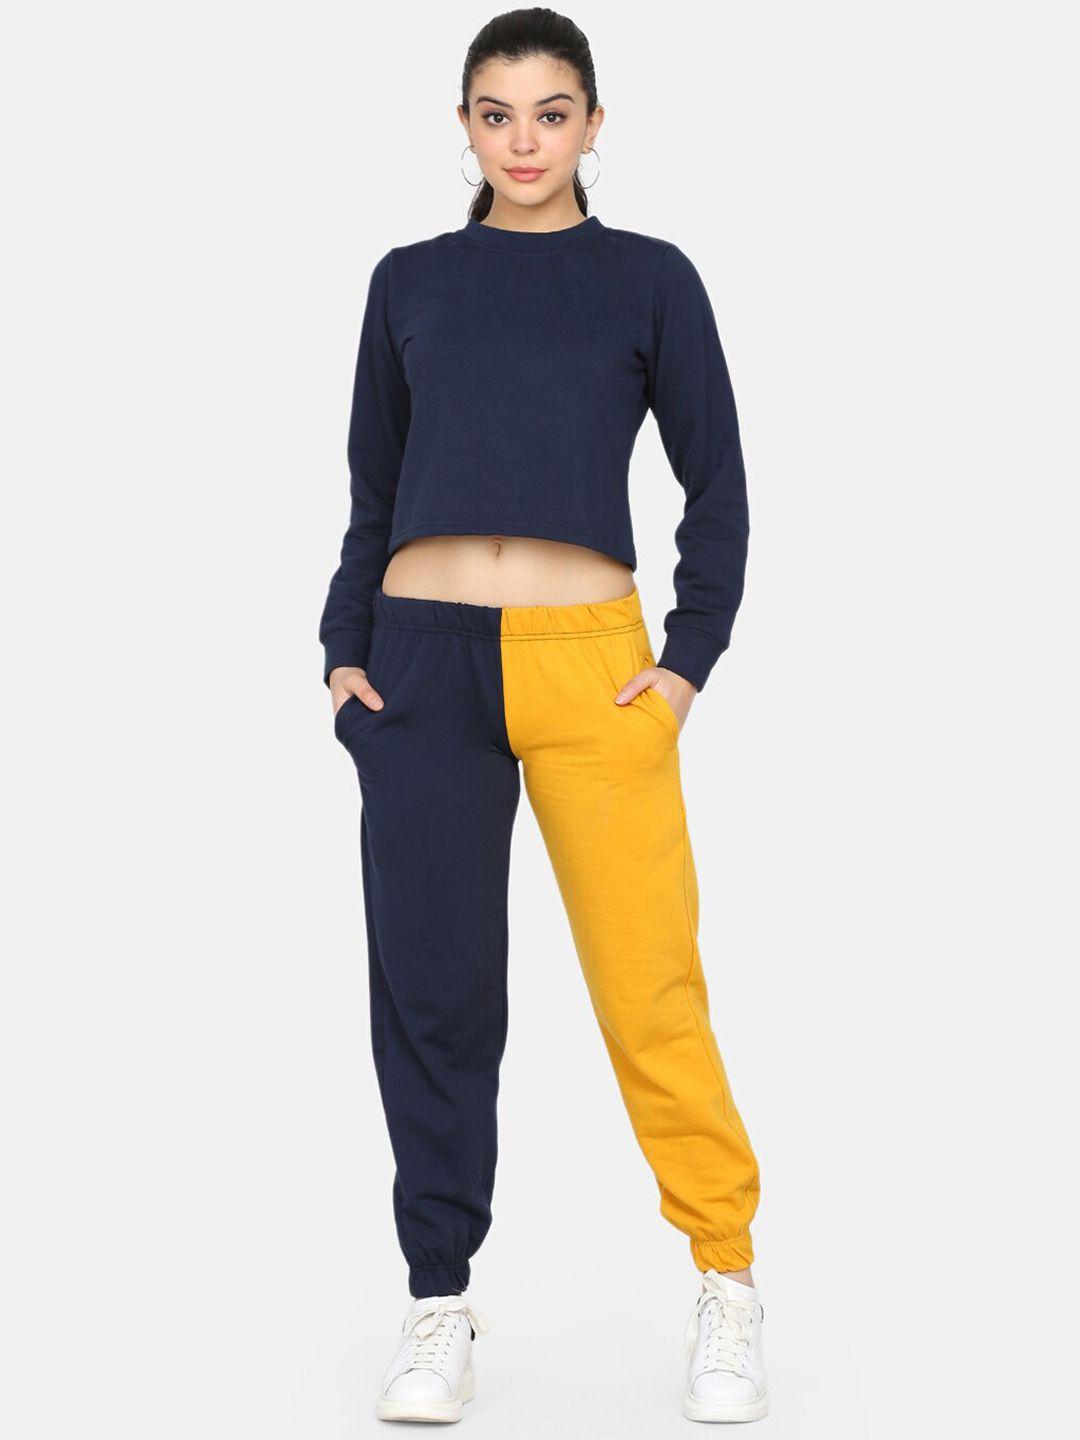 delan women navy blue & yellow color blocked co-ords